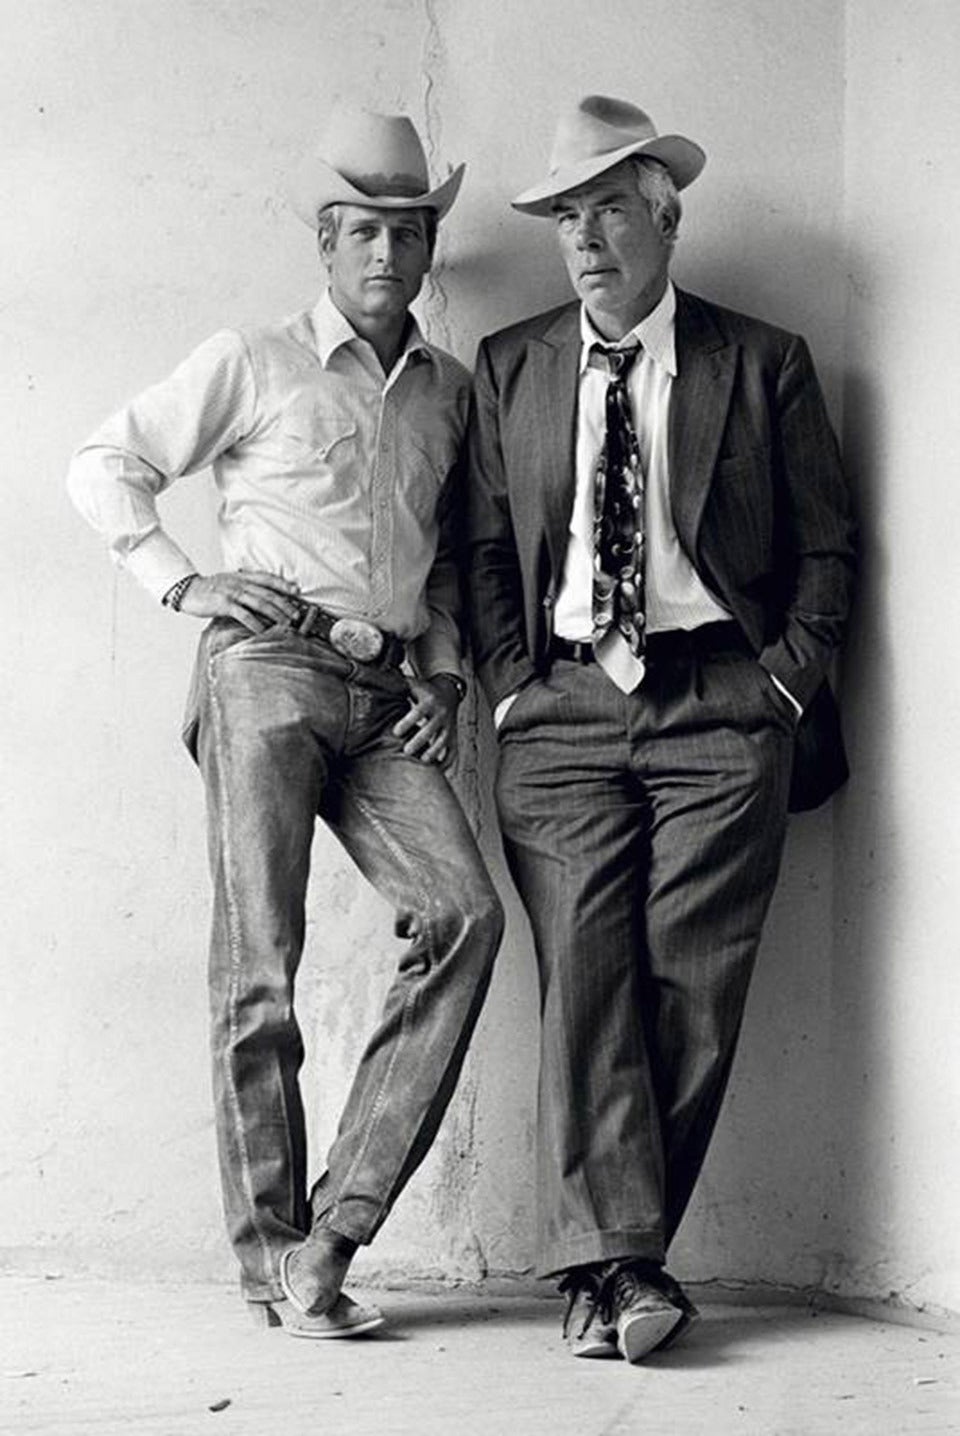 Terry O'Neill Portrait Photograph - Paul Newman and Lee Marvin